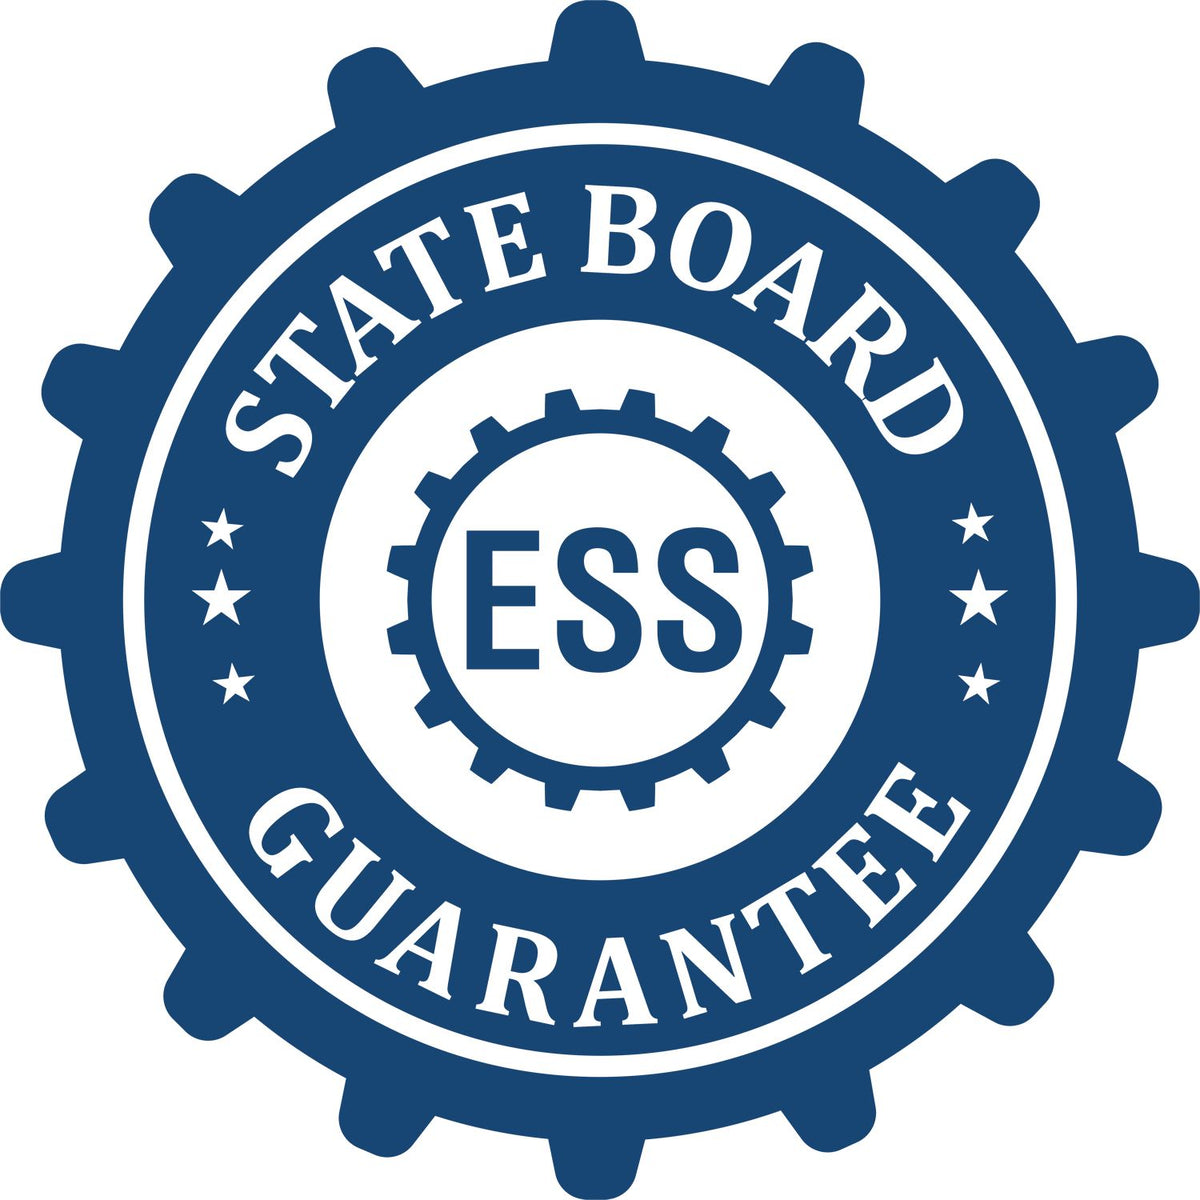 An emblem in a gear shape illustrating a state board guarantee for the State of Maine Long Reach Architectural Embossing Seal product.